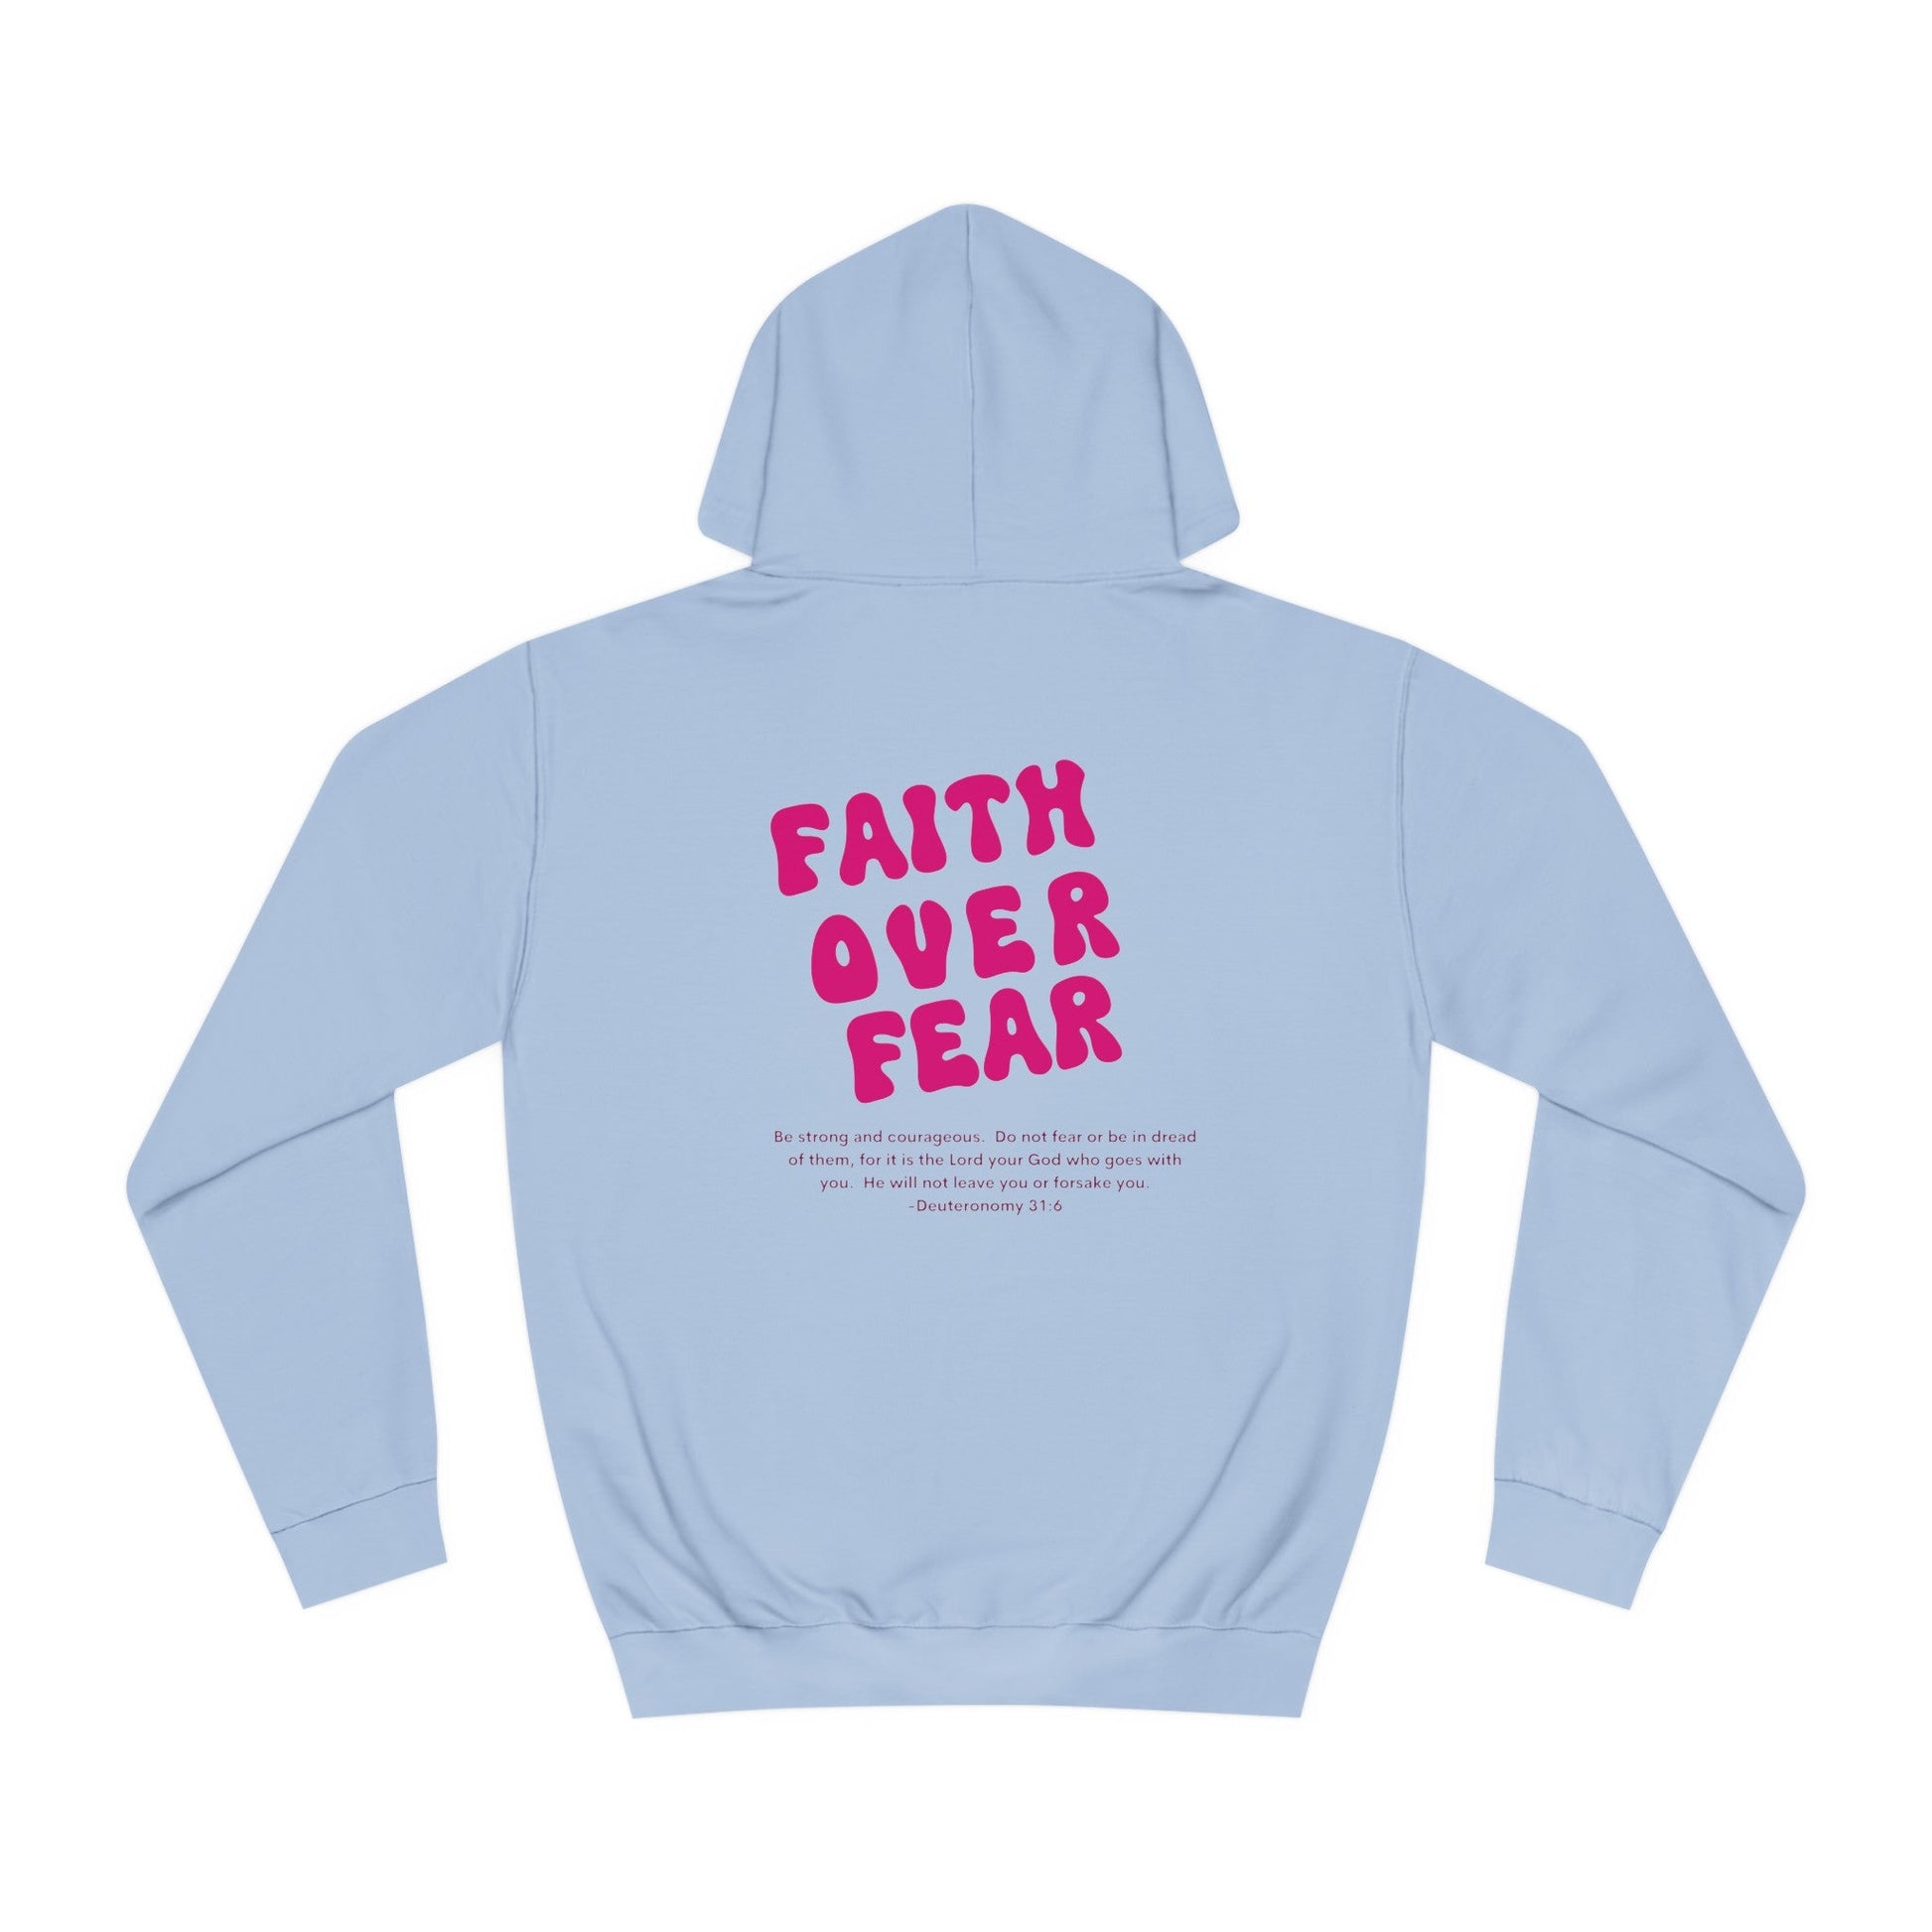 Get trendy with Faith over Fear Sweatshirt - Hoodie available at Good Gift Company. Grab yours for $32.98 today!